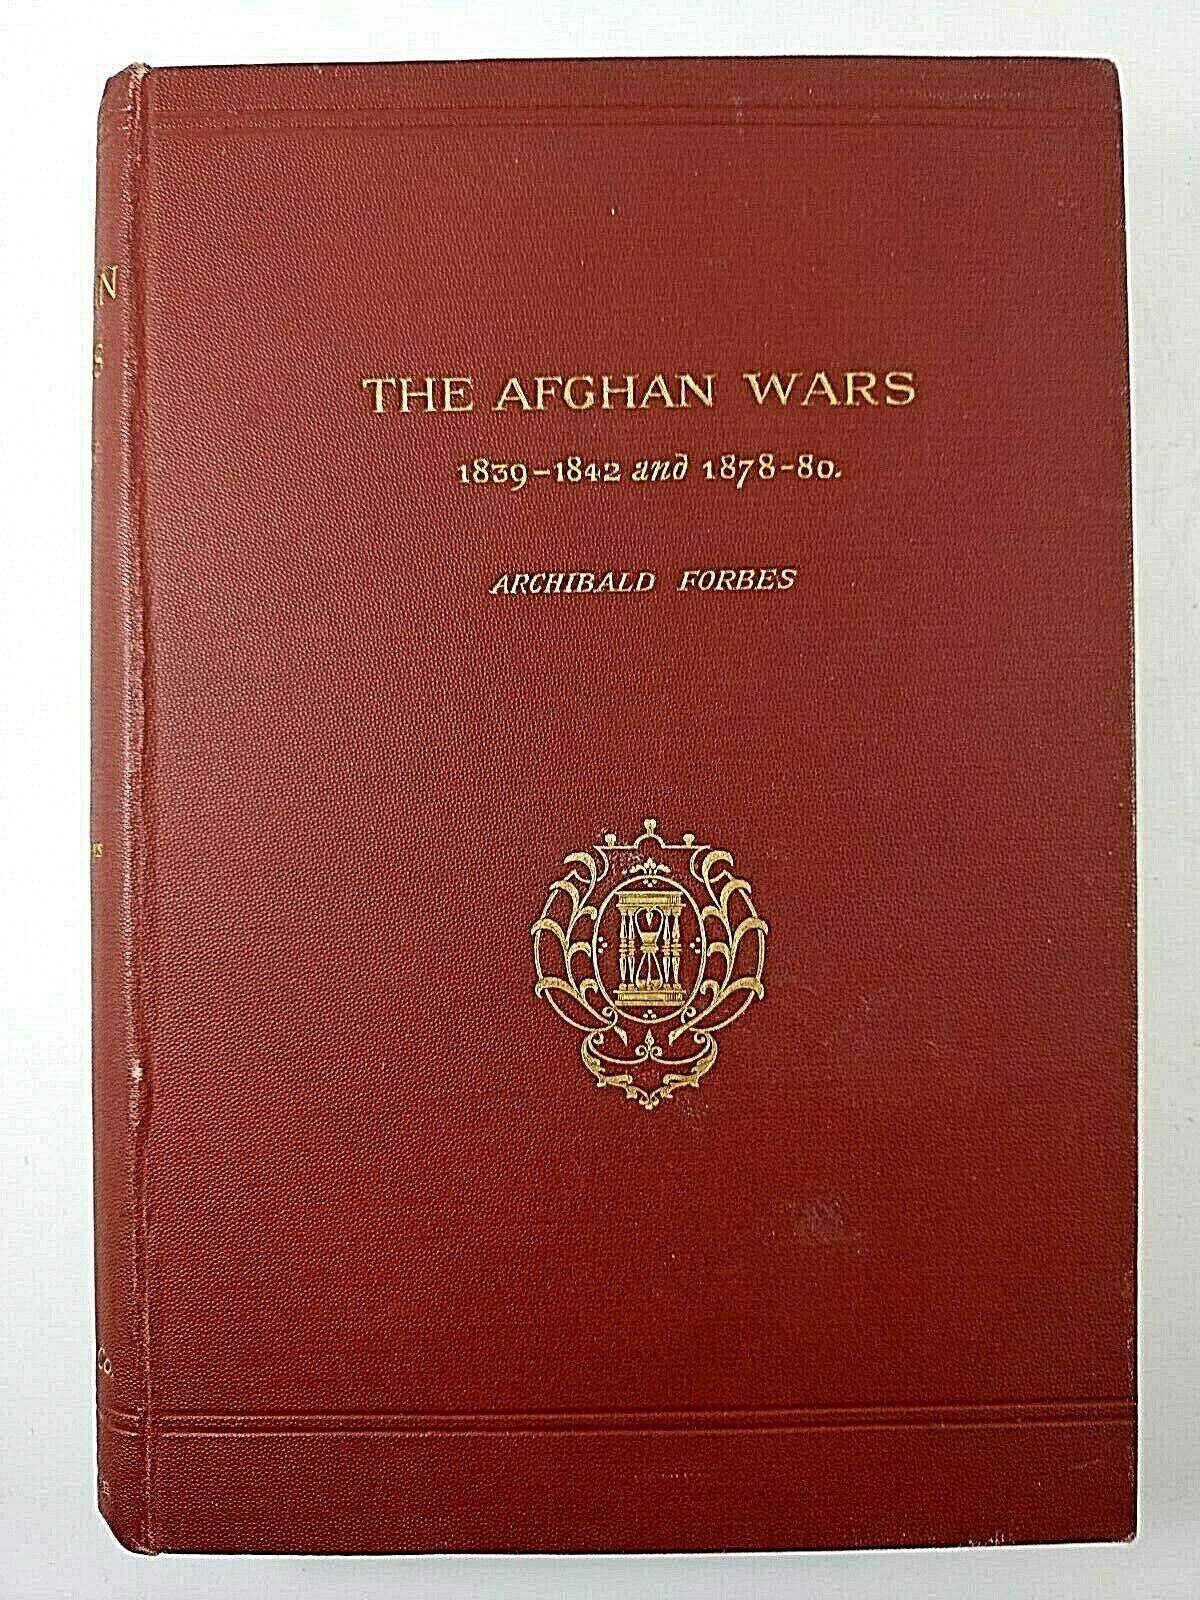 British Army The Afghan Wars 1839 To 1842 And 1878 To 1880 Reference Book